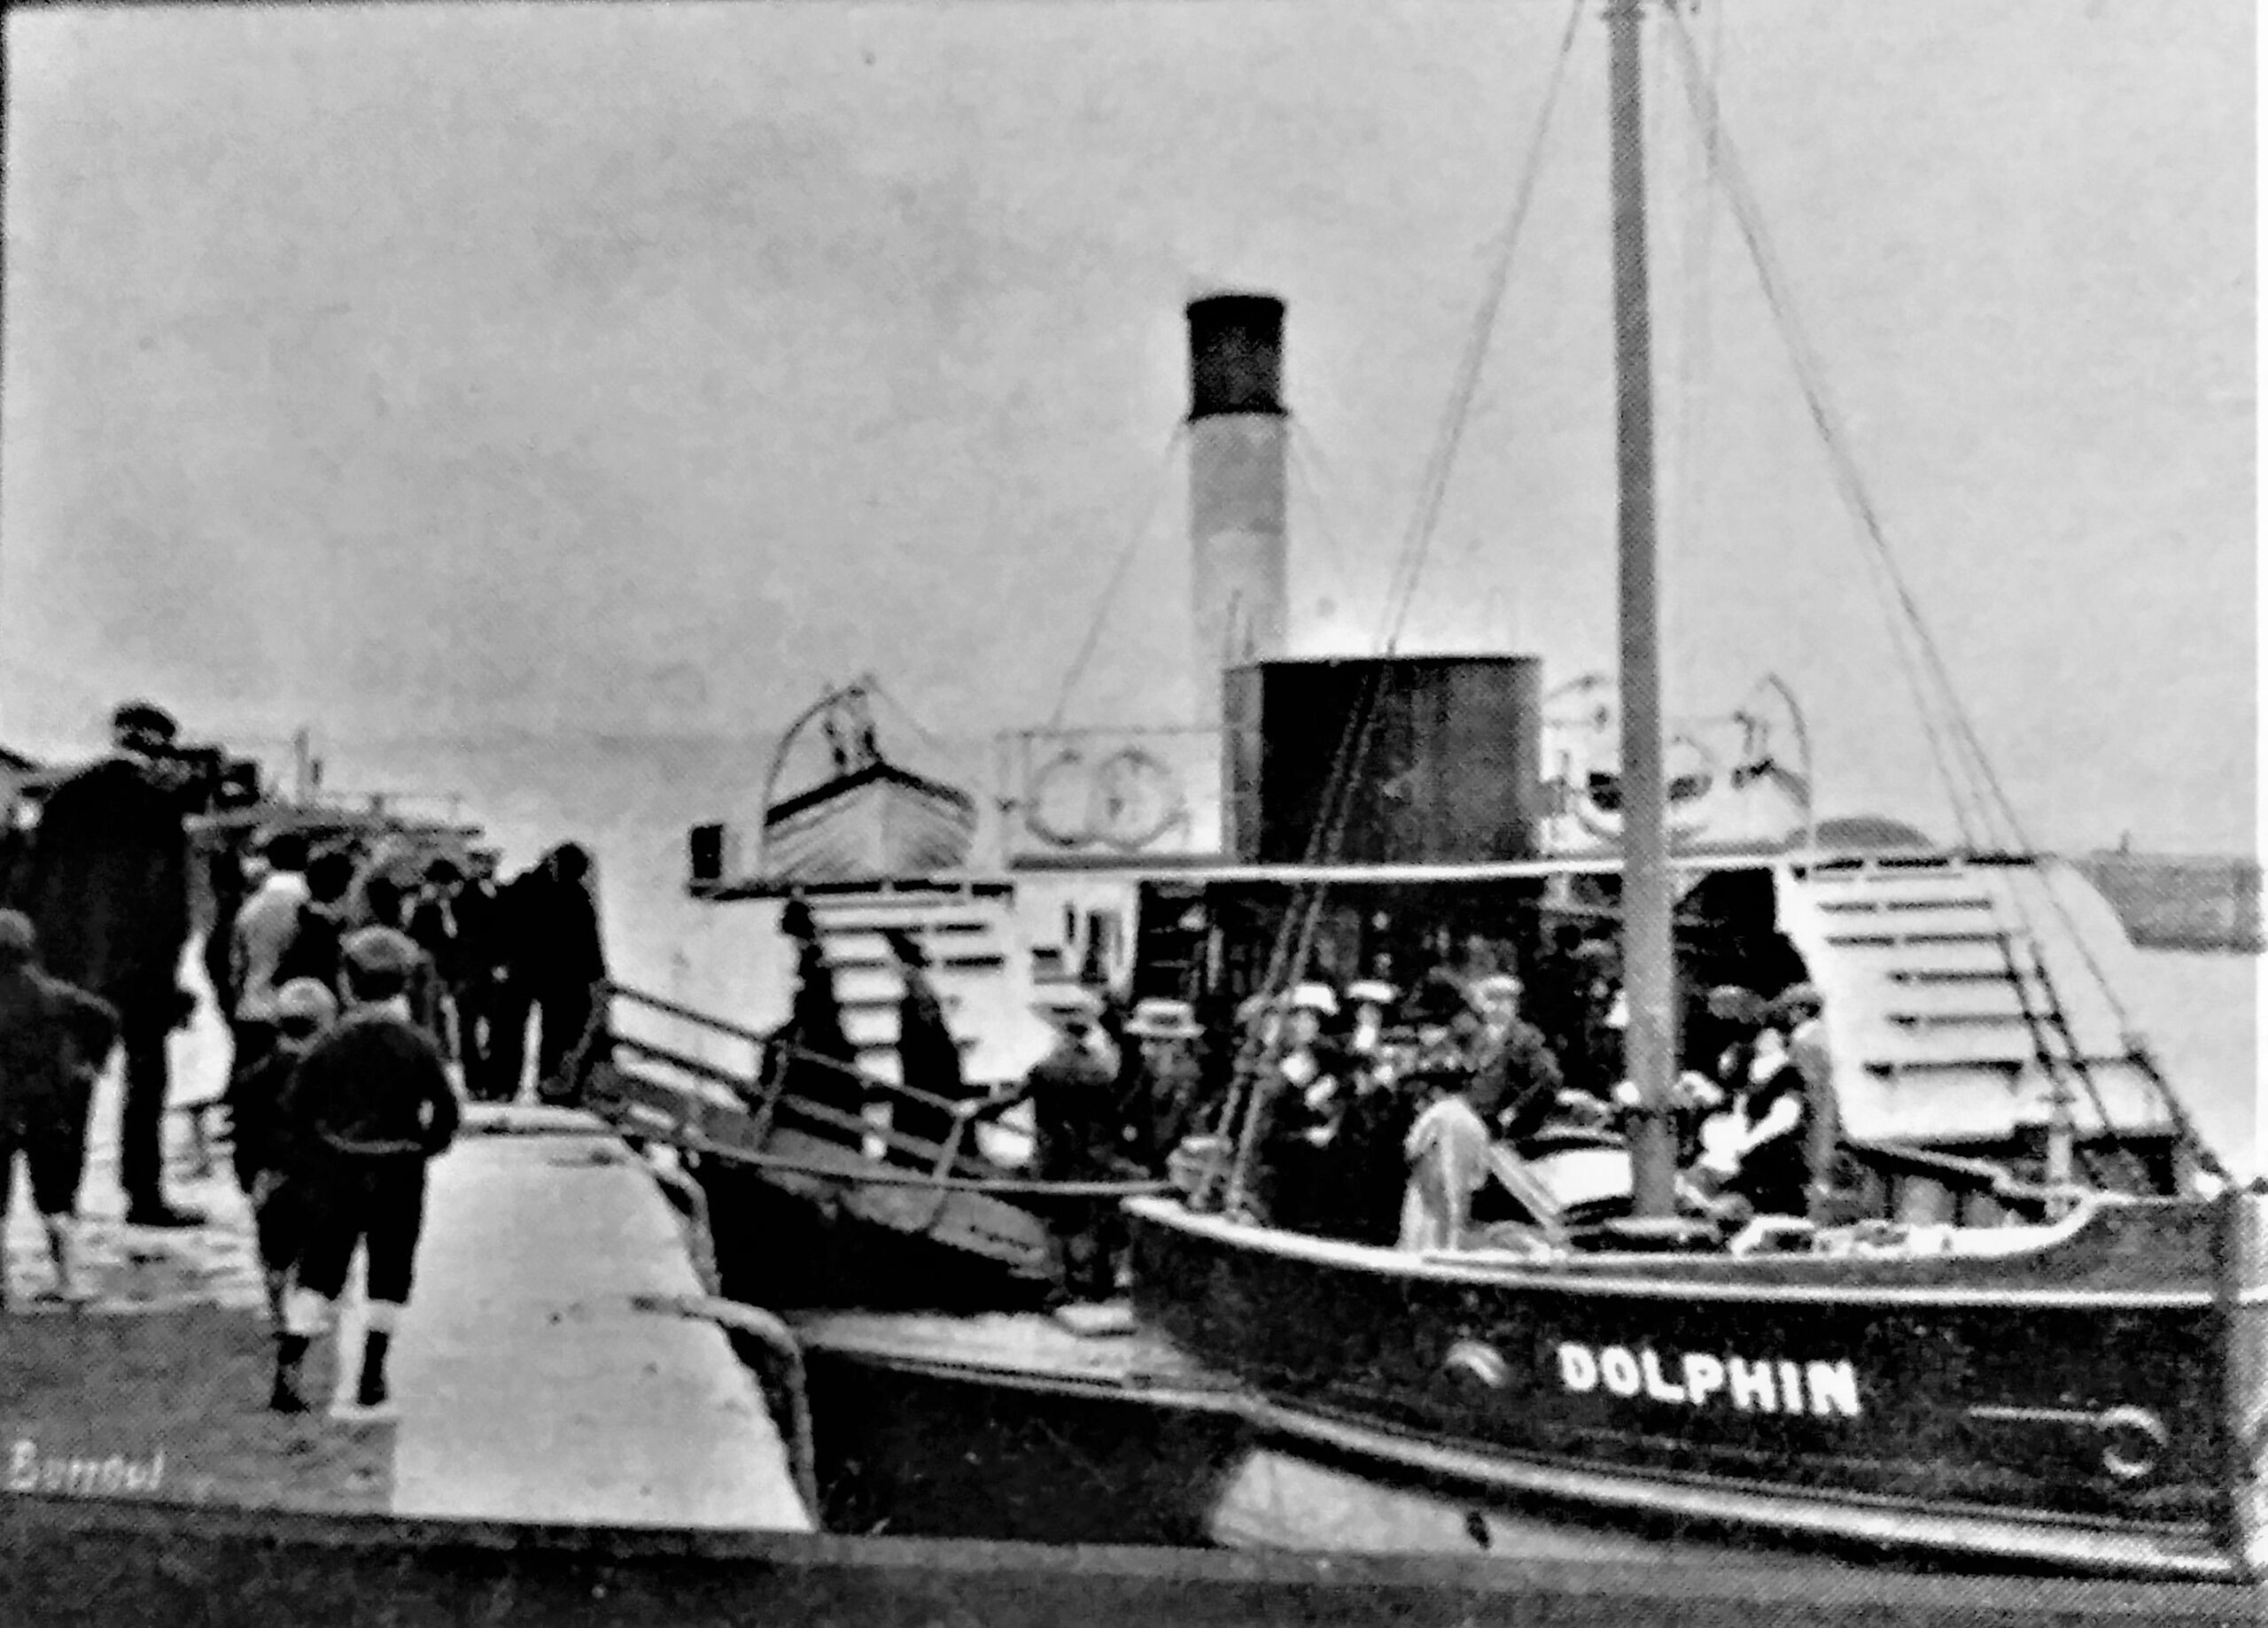 Tayport Heritage Trail - Board 1 - The Dolphin passenger ferry